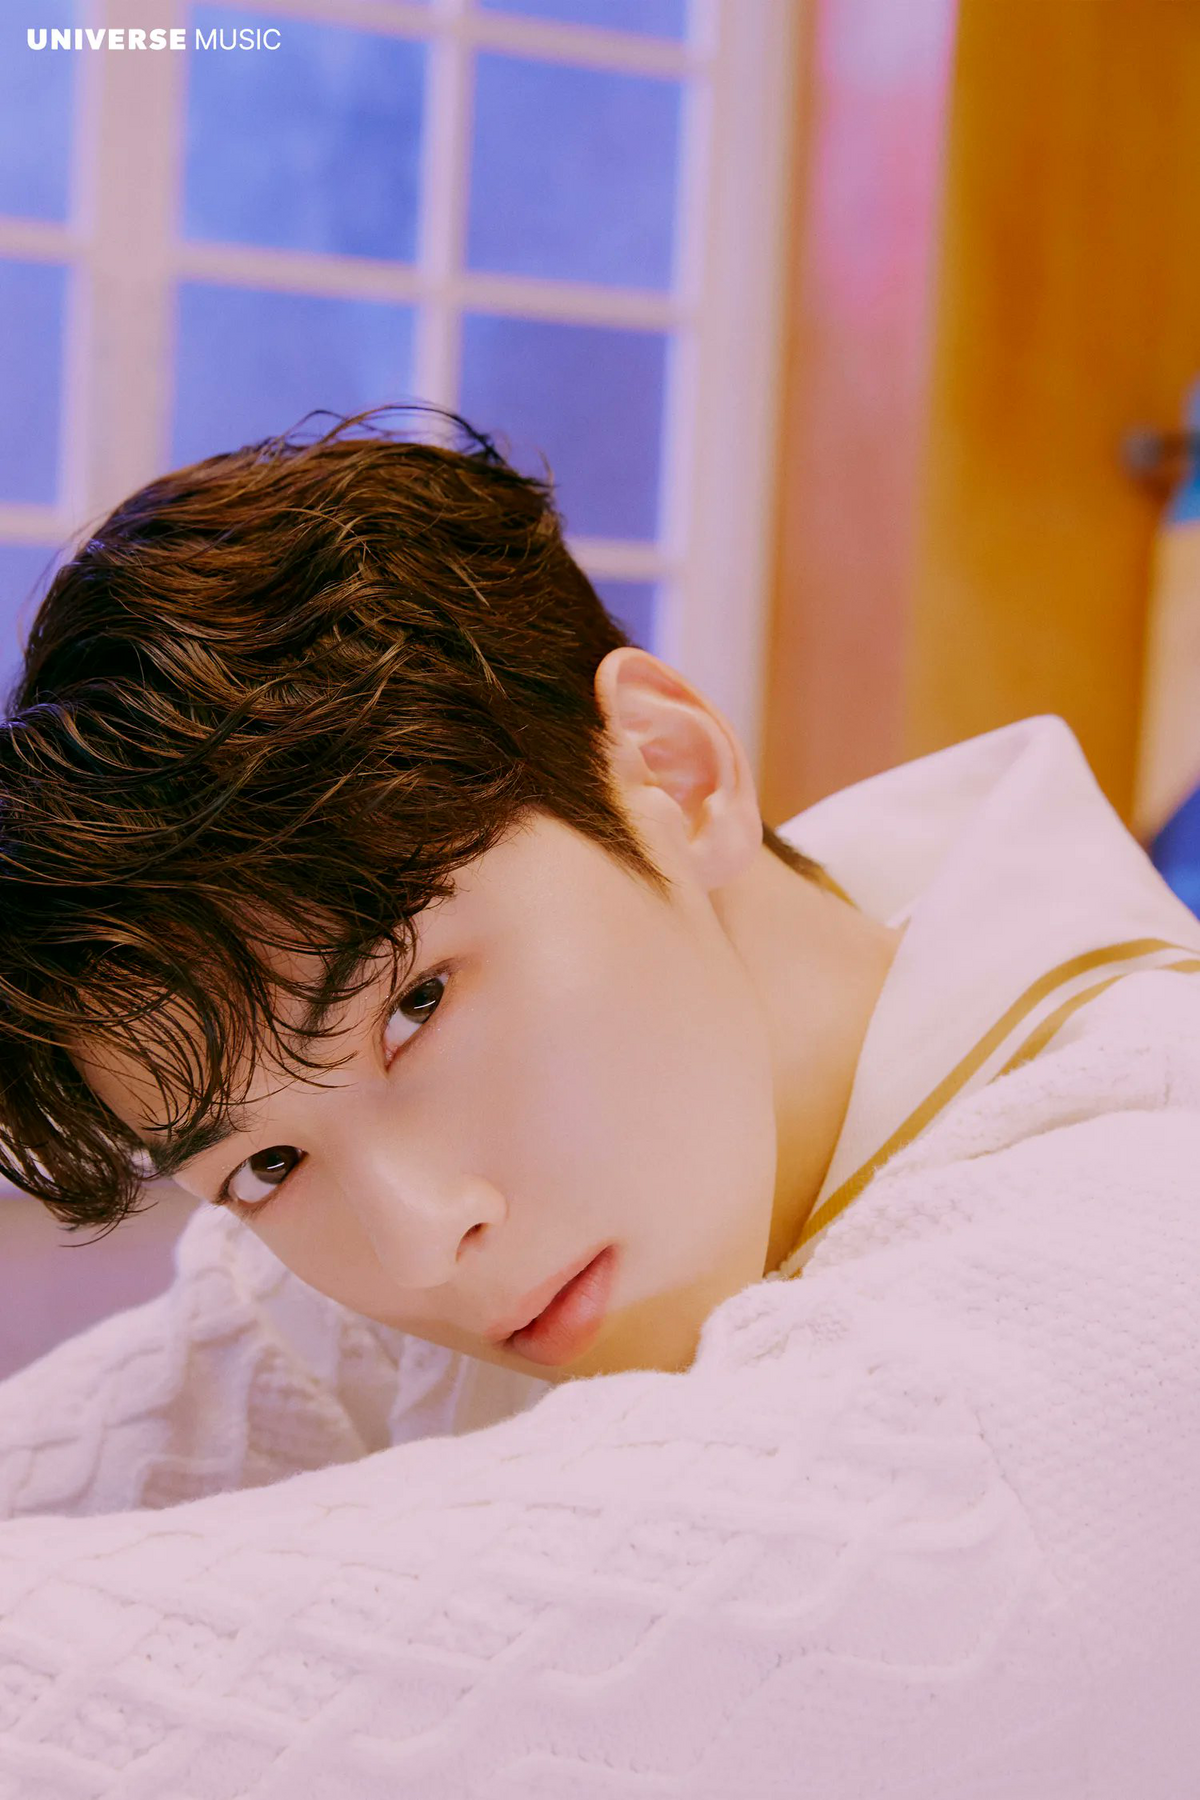 Astro's Cha Eun-woo releases second teaser video for upcoming song